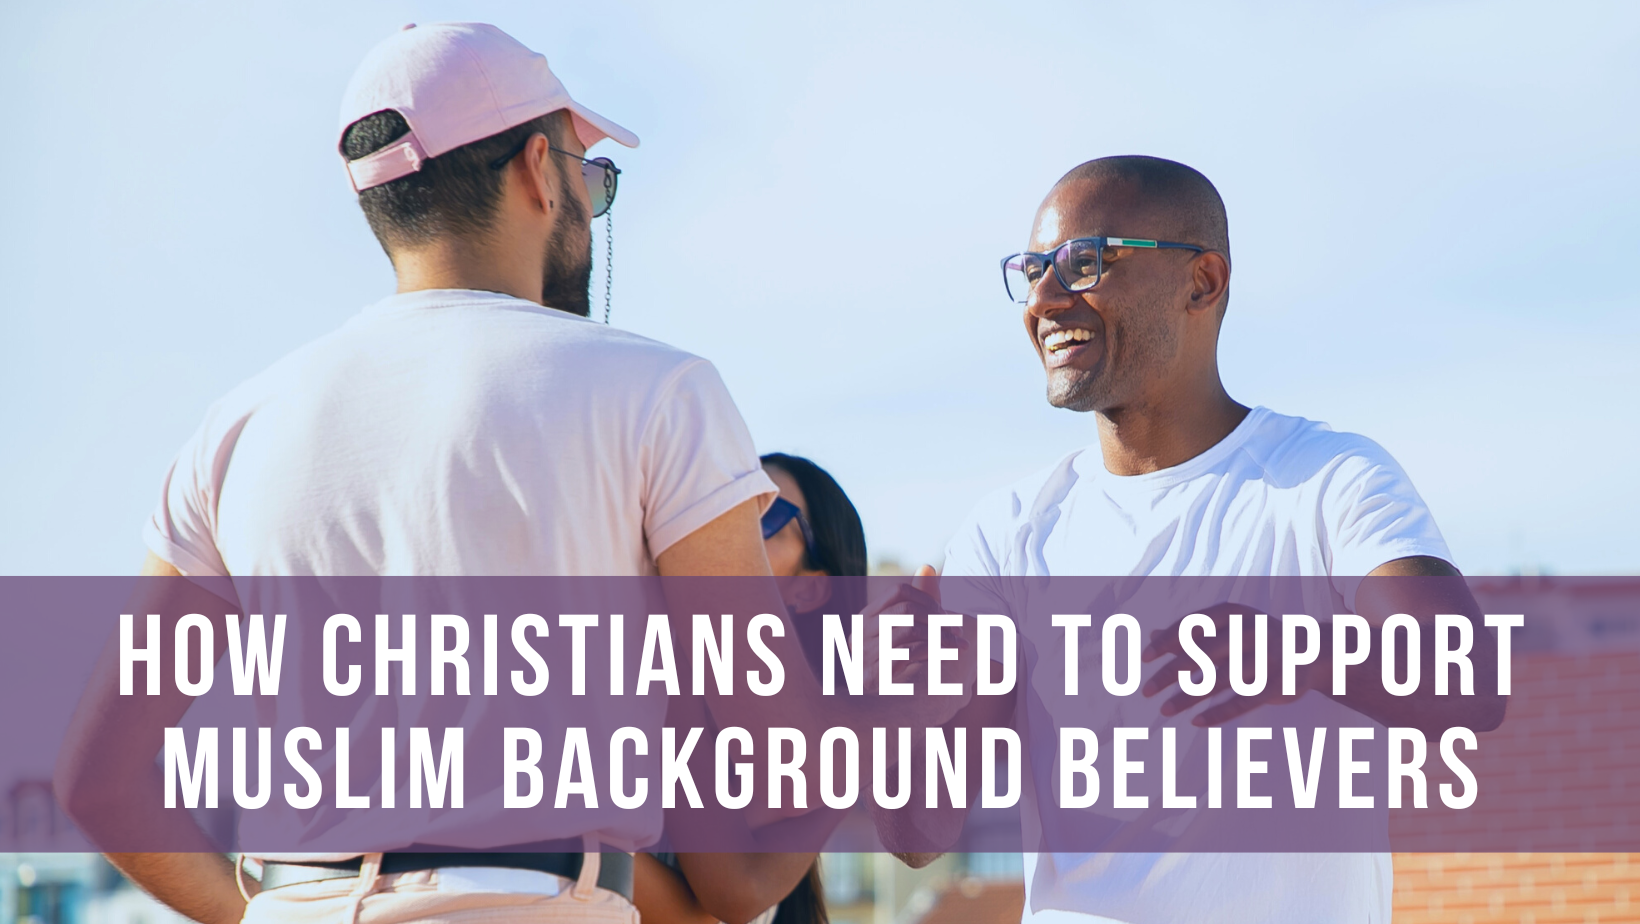 How Christians need to support Muslim background believers